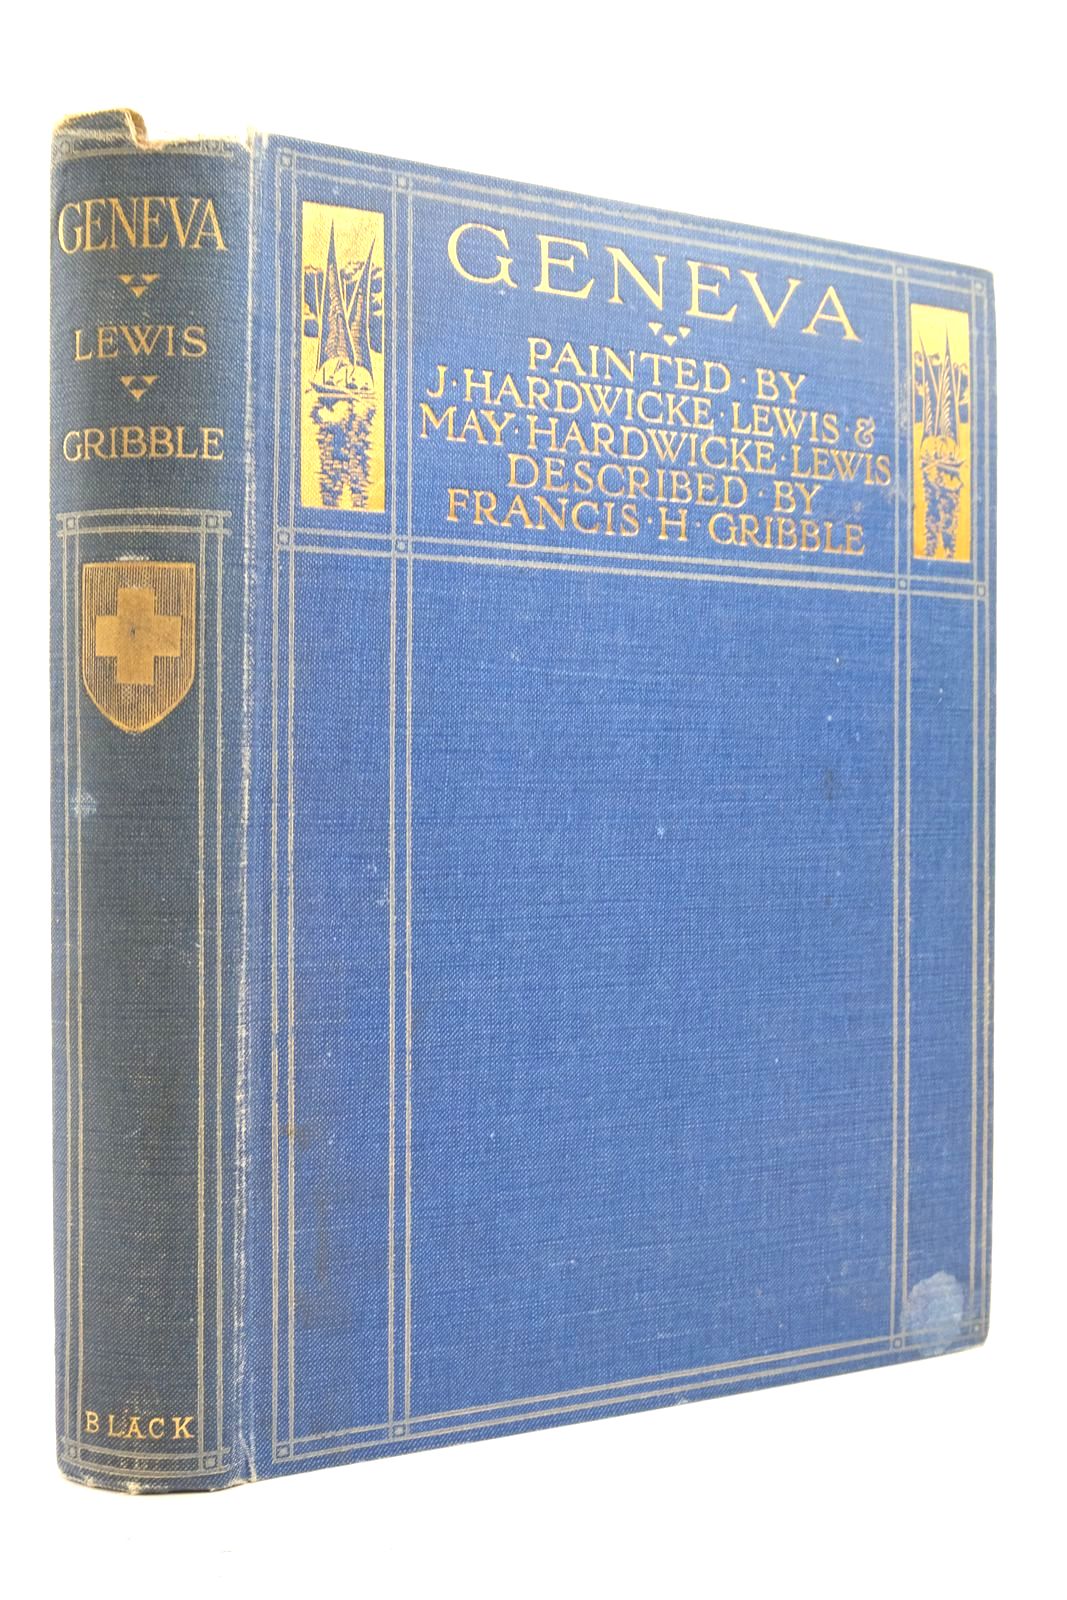 Photo of GENEVA written by Gribble, Francis illustrated by Lewis, J. Hardwicke
Lewis, May Hardwicke published by Adam & Charles Black (STOCK CODE: 2137579)  for sale by Stella & Rose's Books